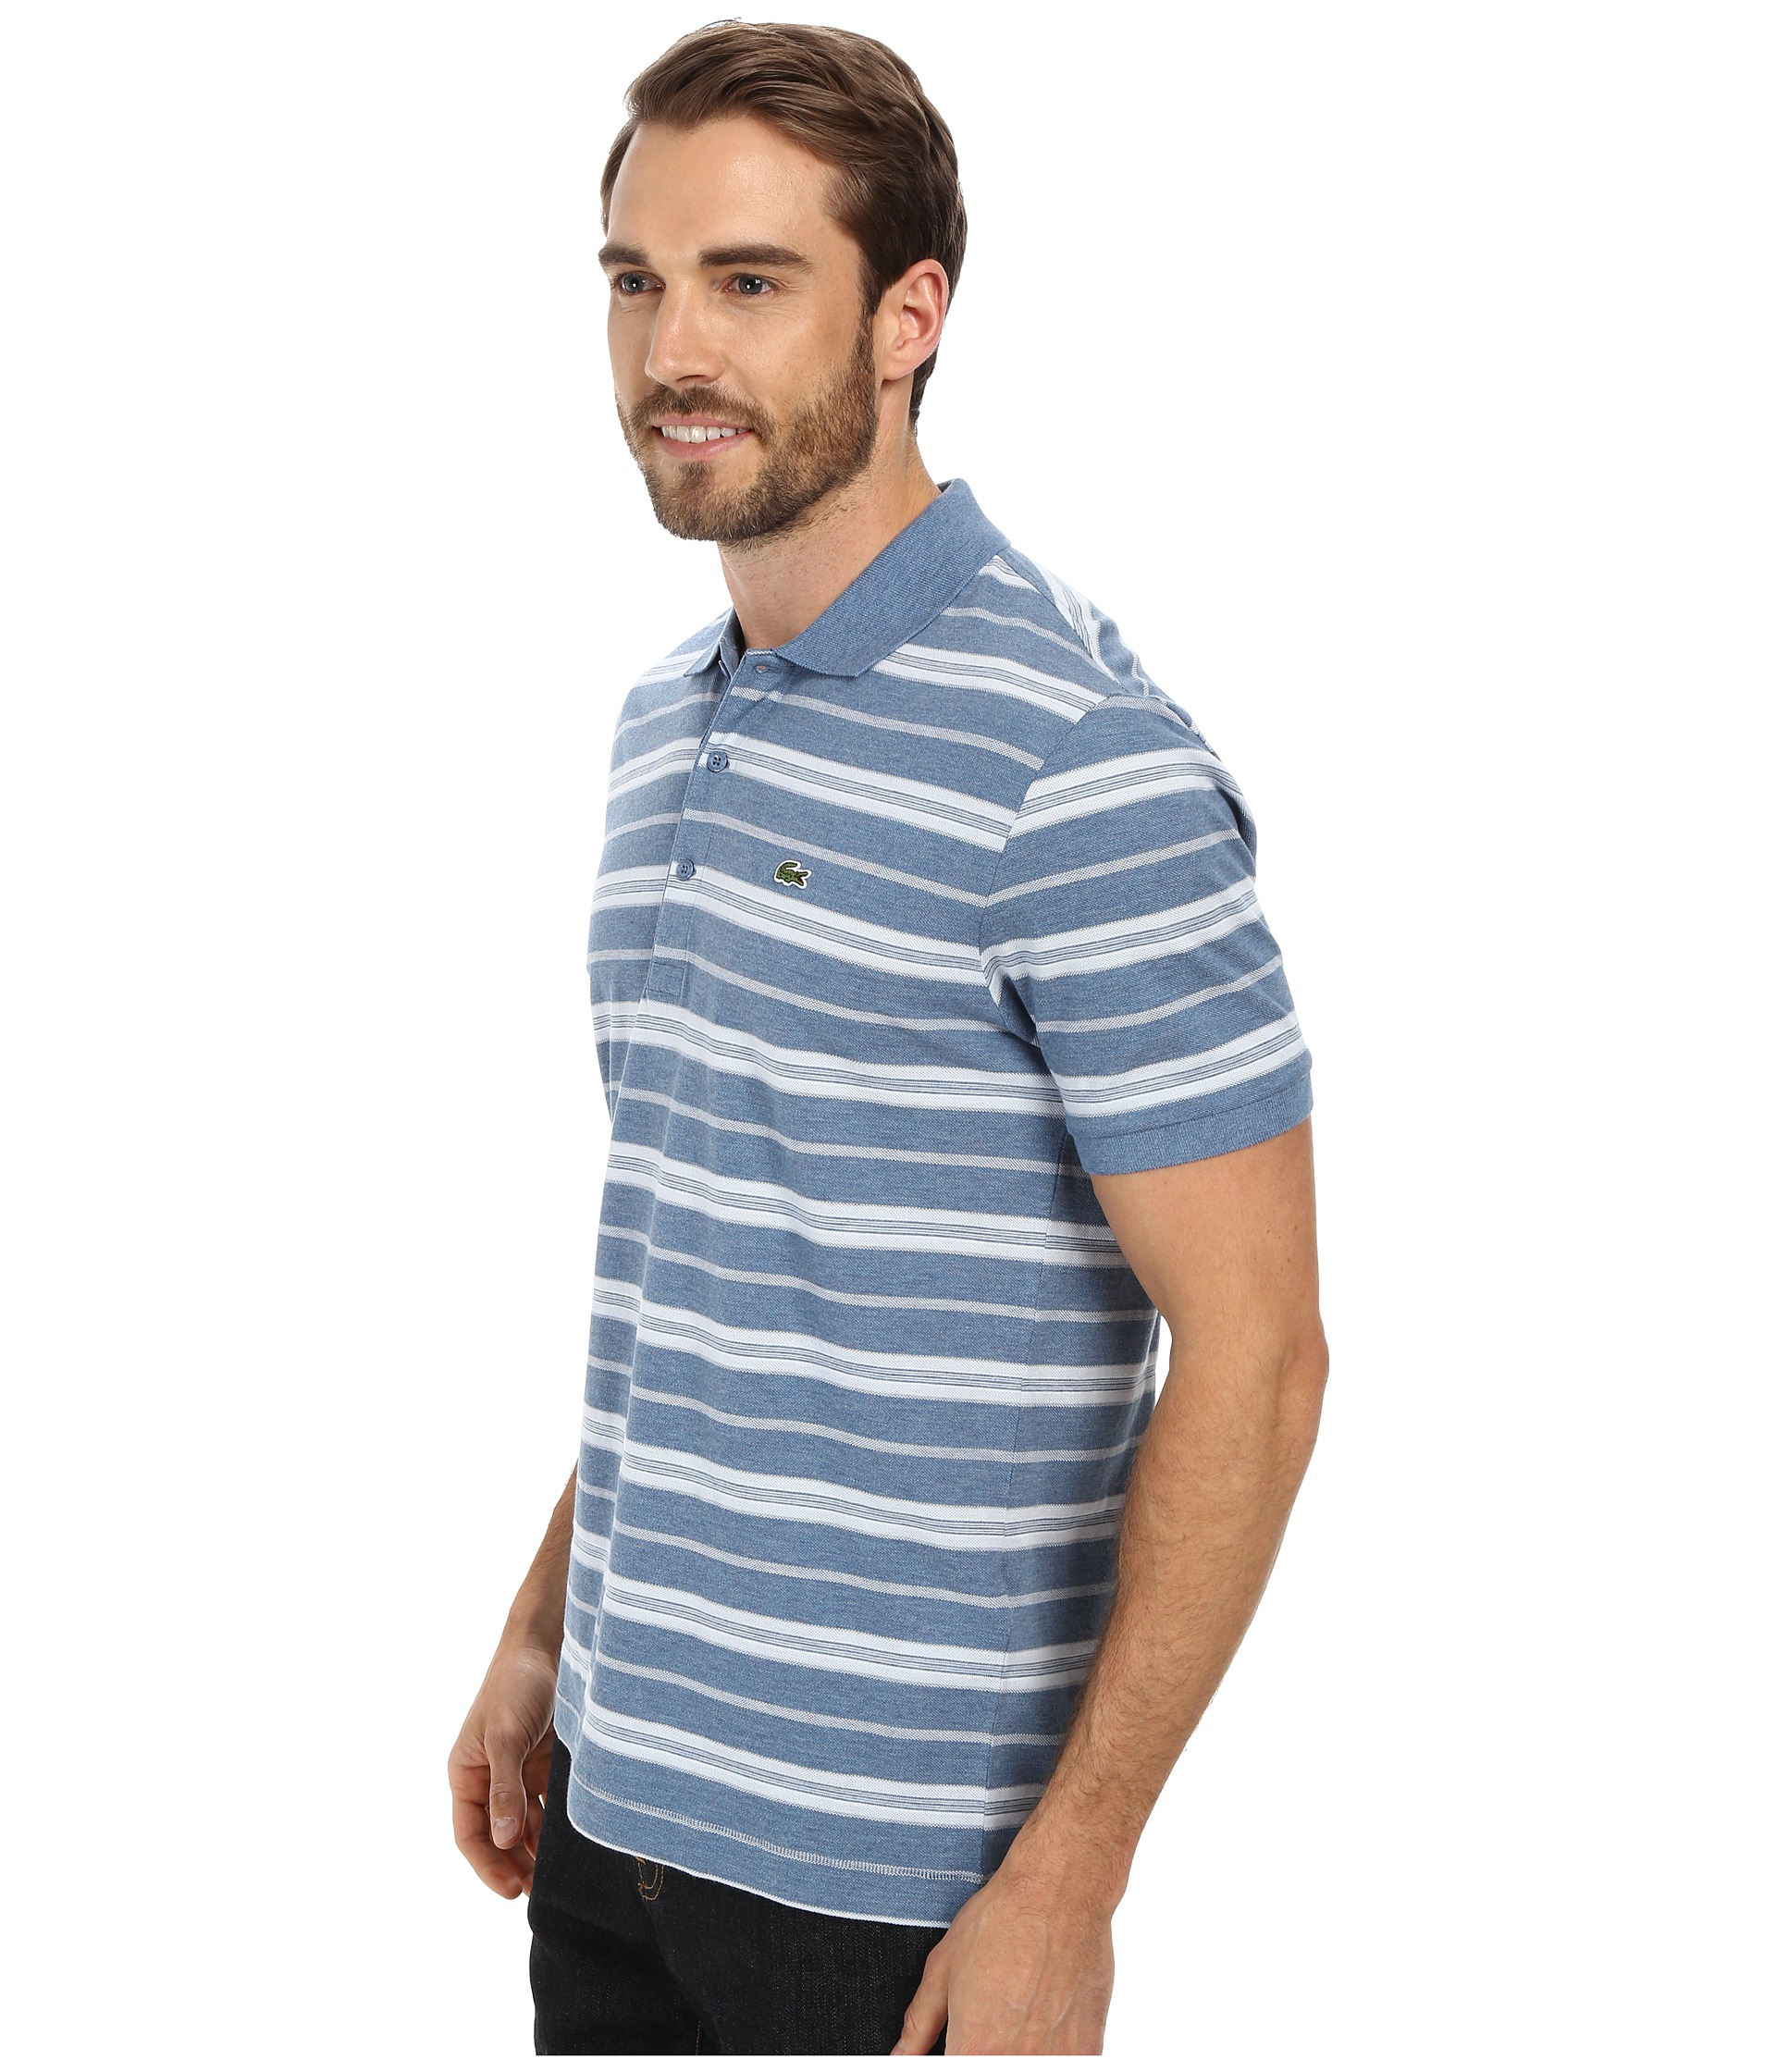 Lyst - Lacoste Cotton Stretch Pique Jersey Stripe Polo in Blue for Men